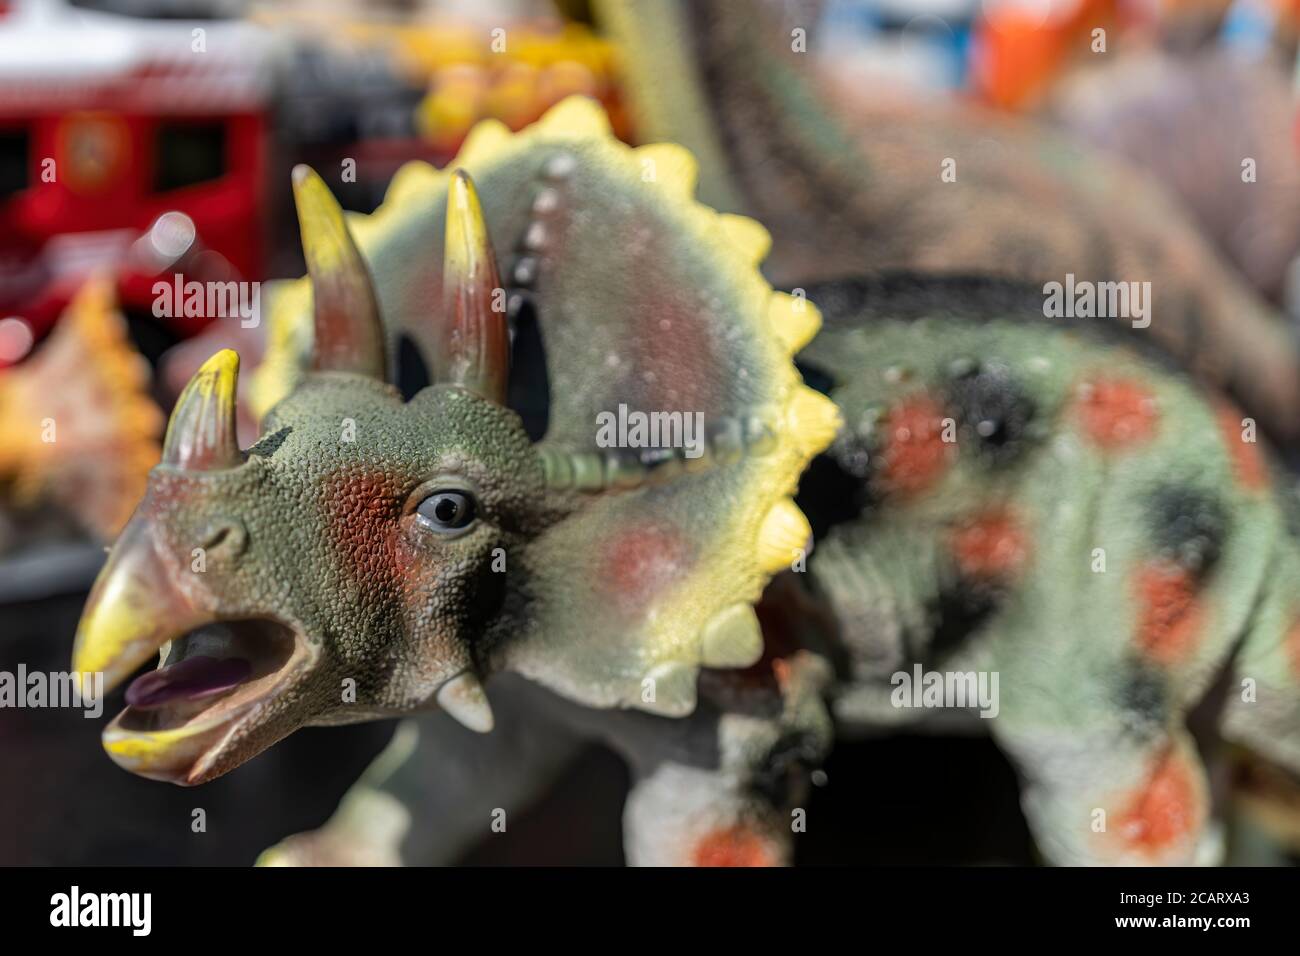 Plastic dinosaurs (Triceratops) at a flea market in Hamburg, Germany. Macro photography of the head with a blur gradient. Stock Photo